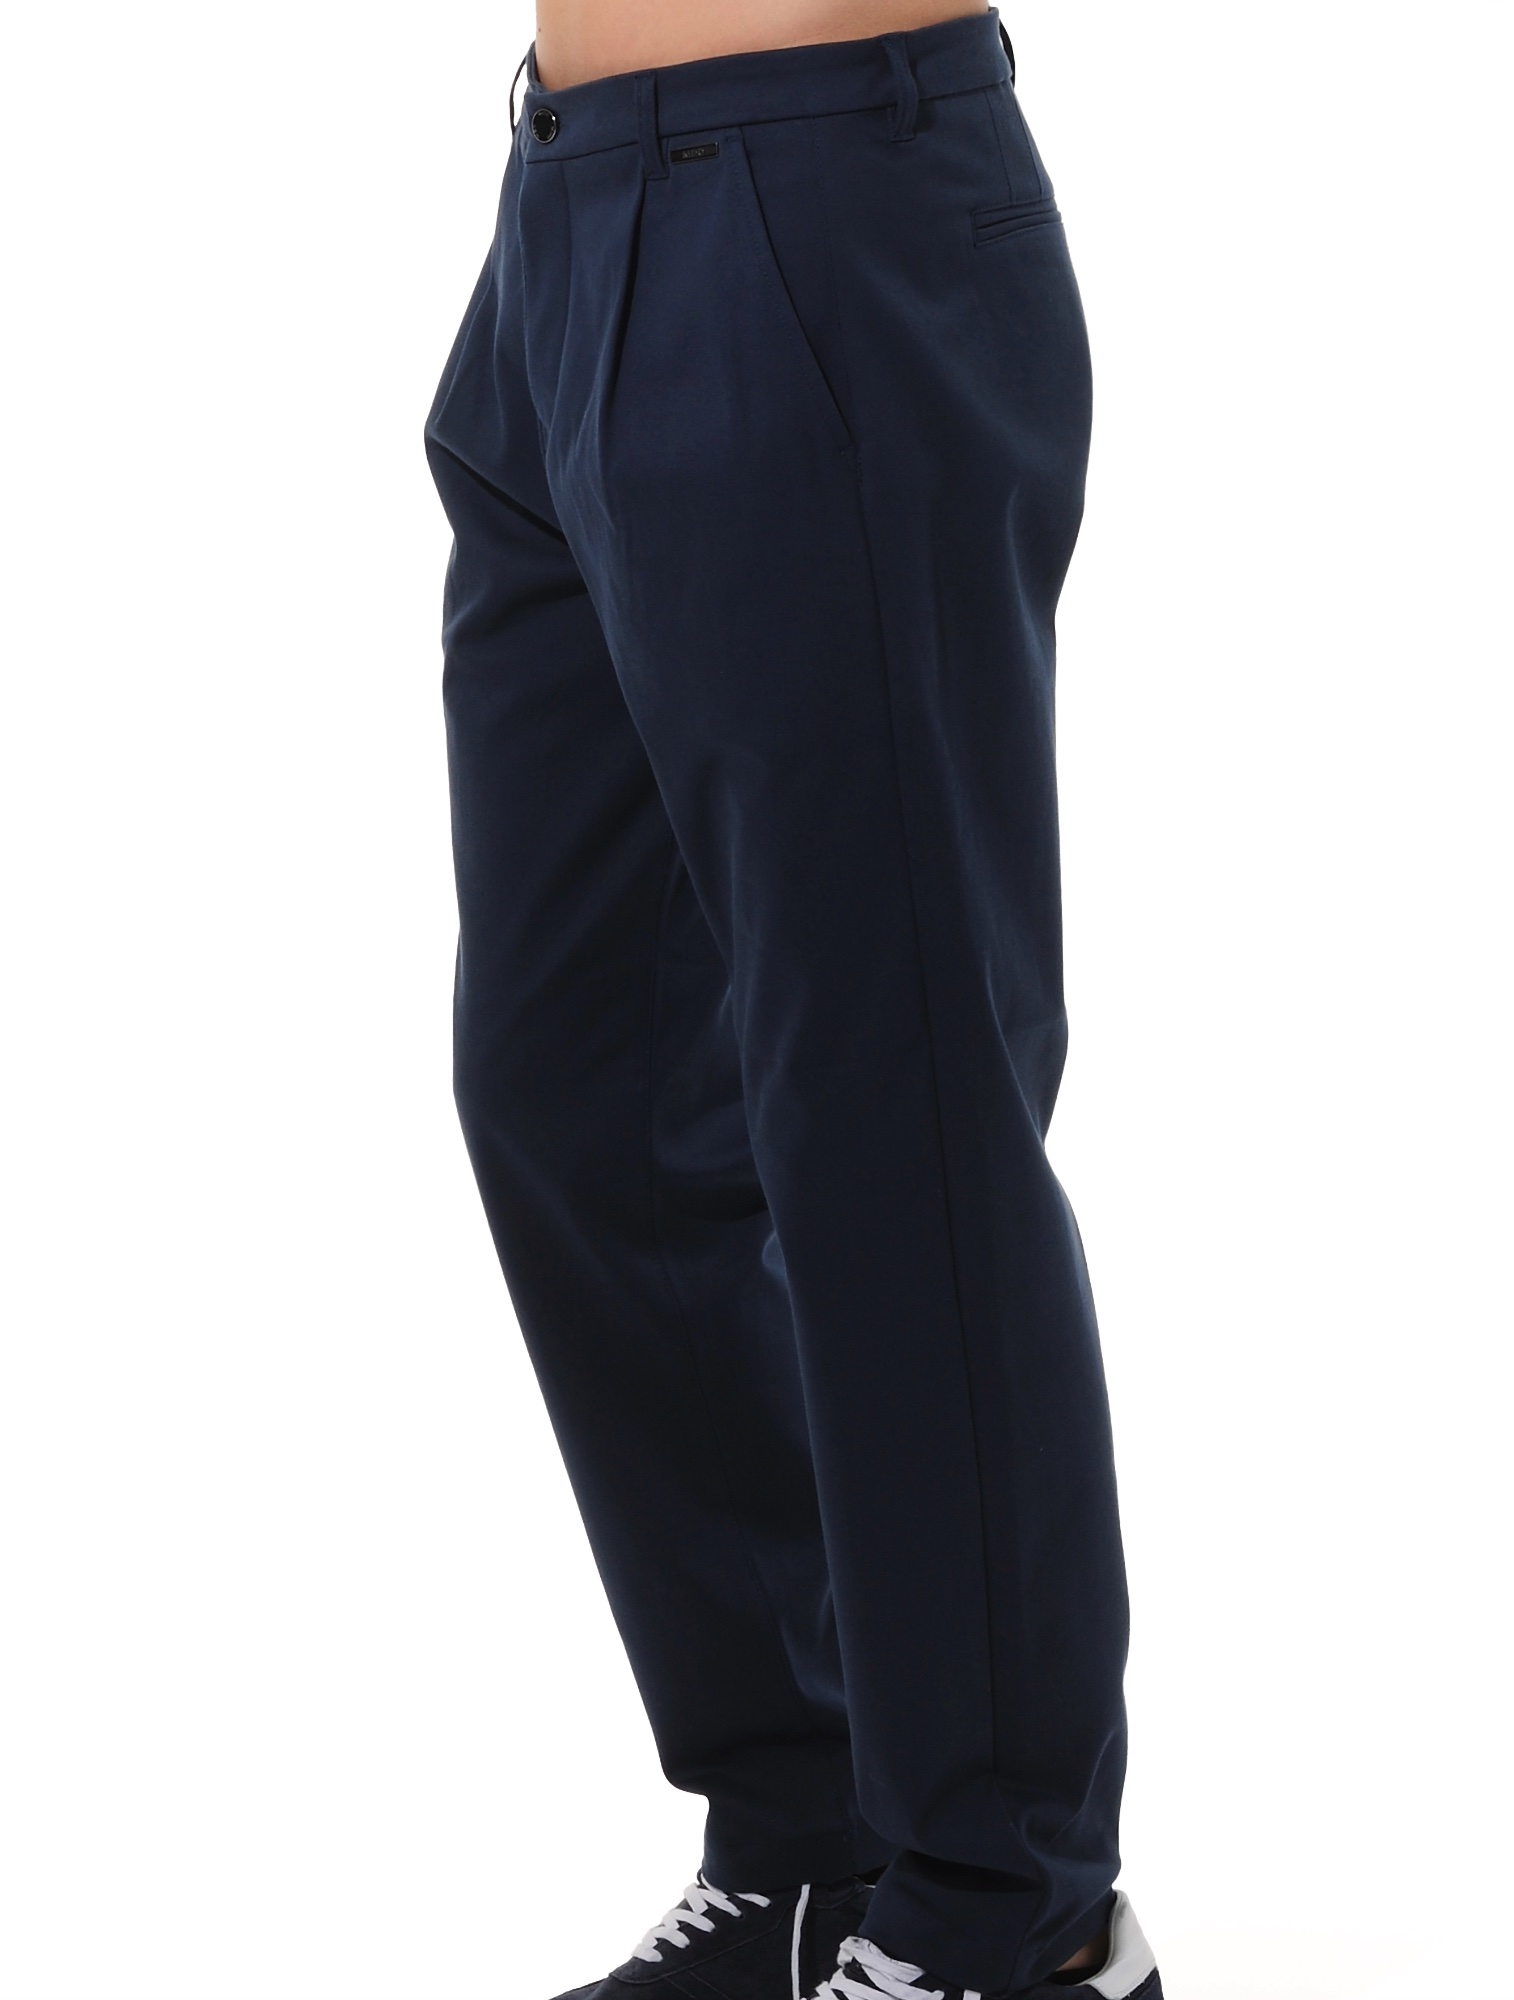 Denim stretch relaxed fit chinos navy